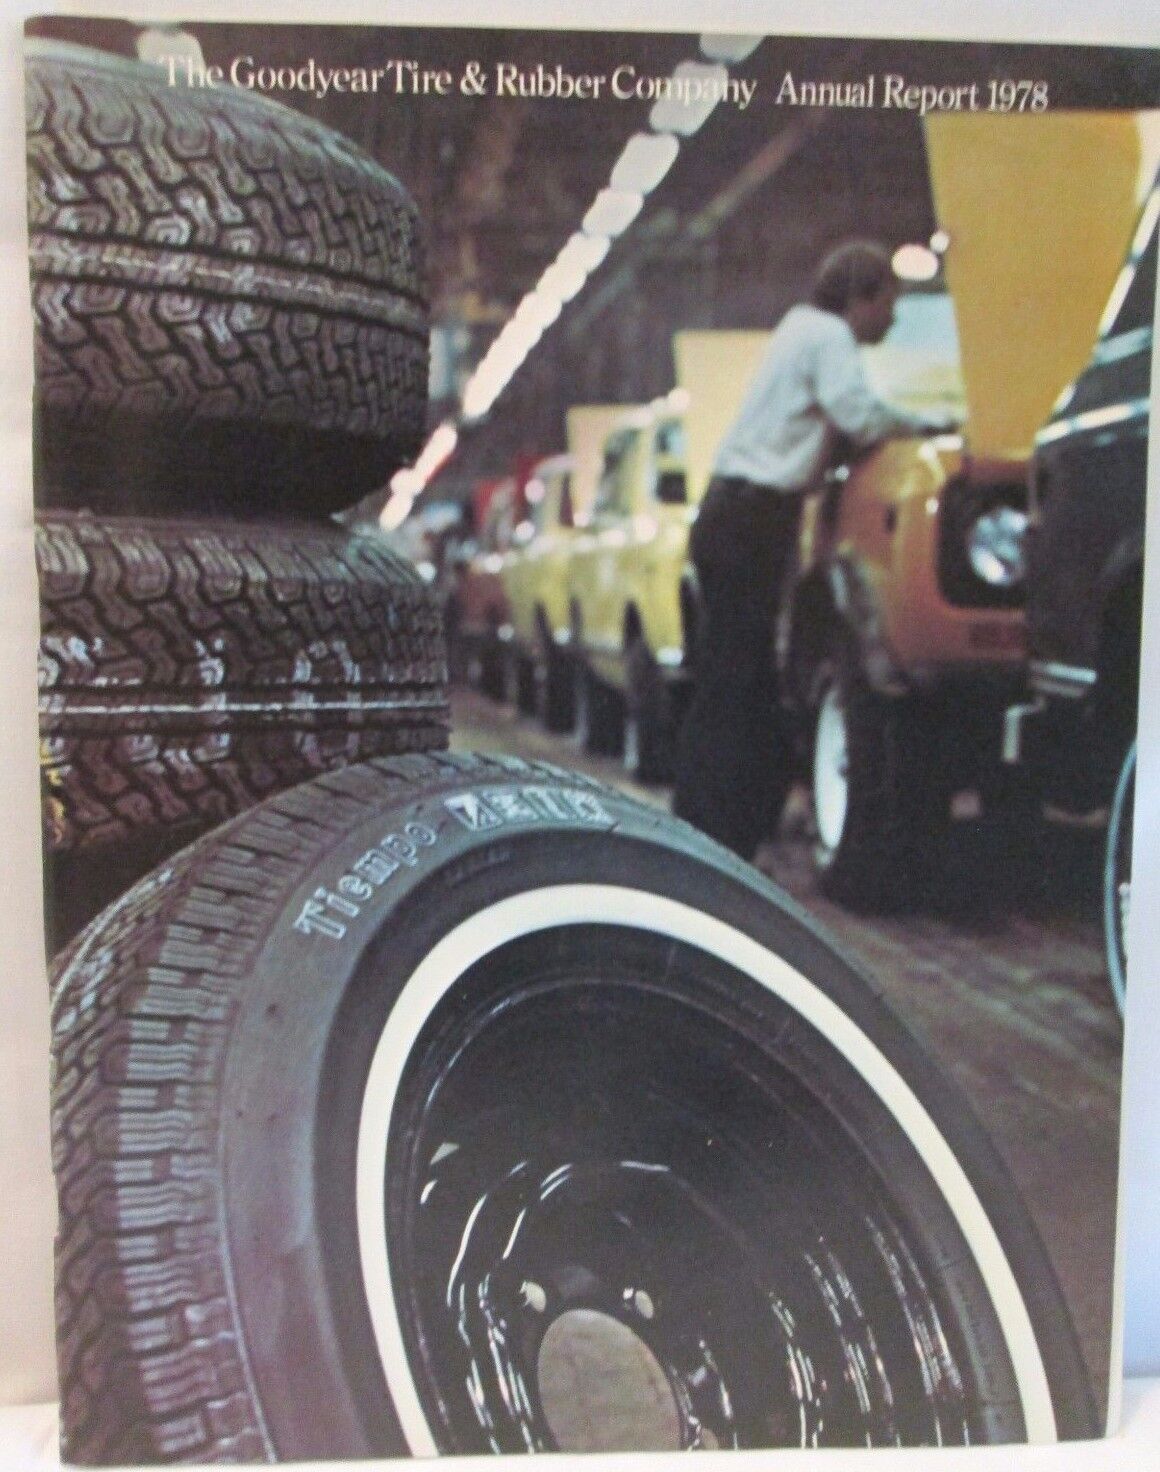 Vintage Goodyear Tire & Rubber Company Annual Report 1978